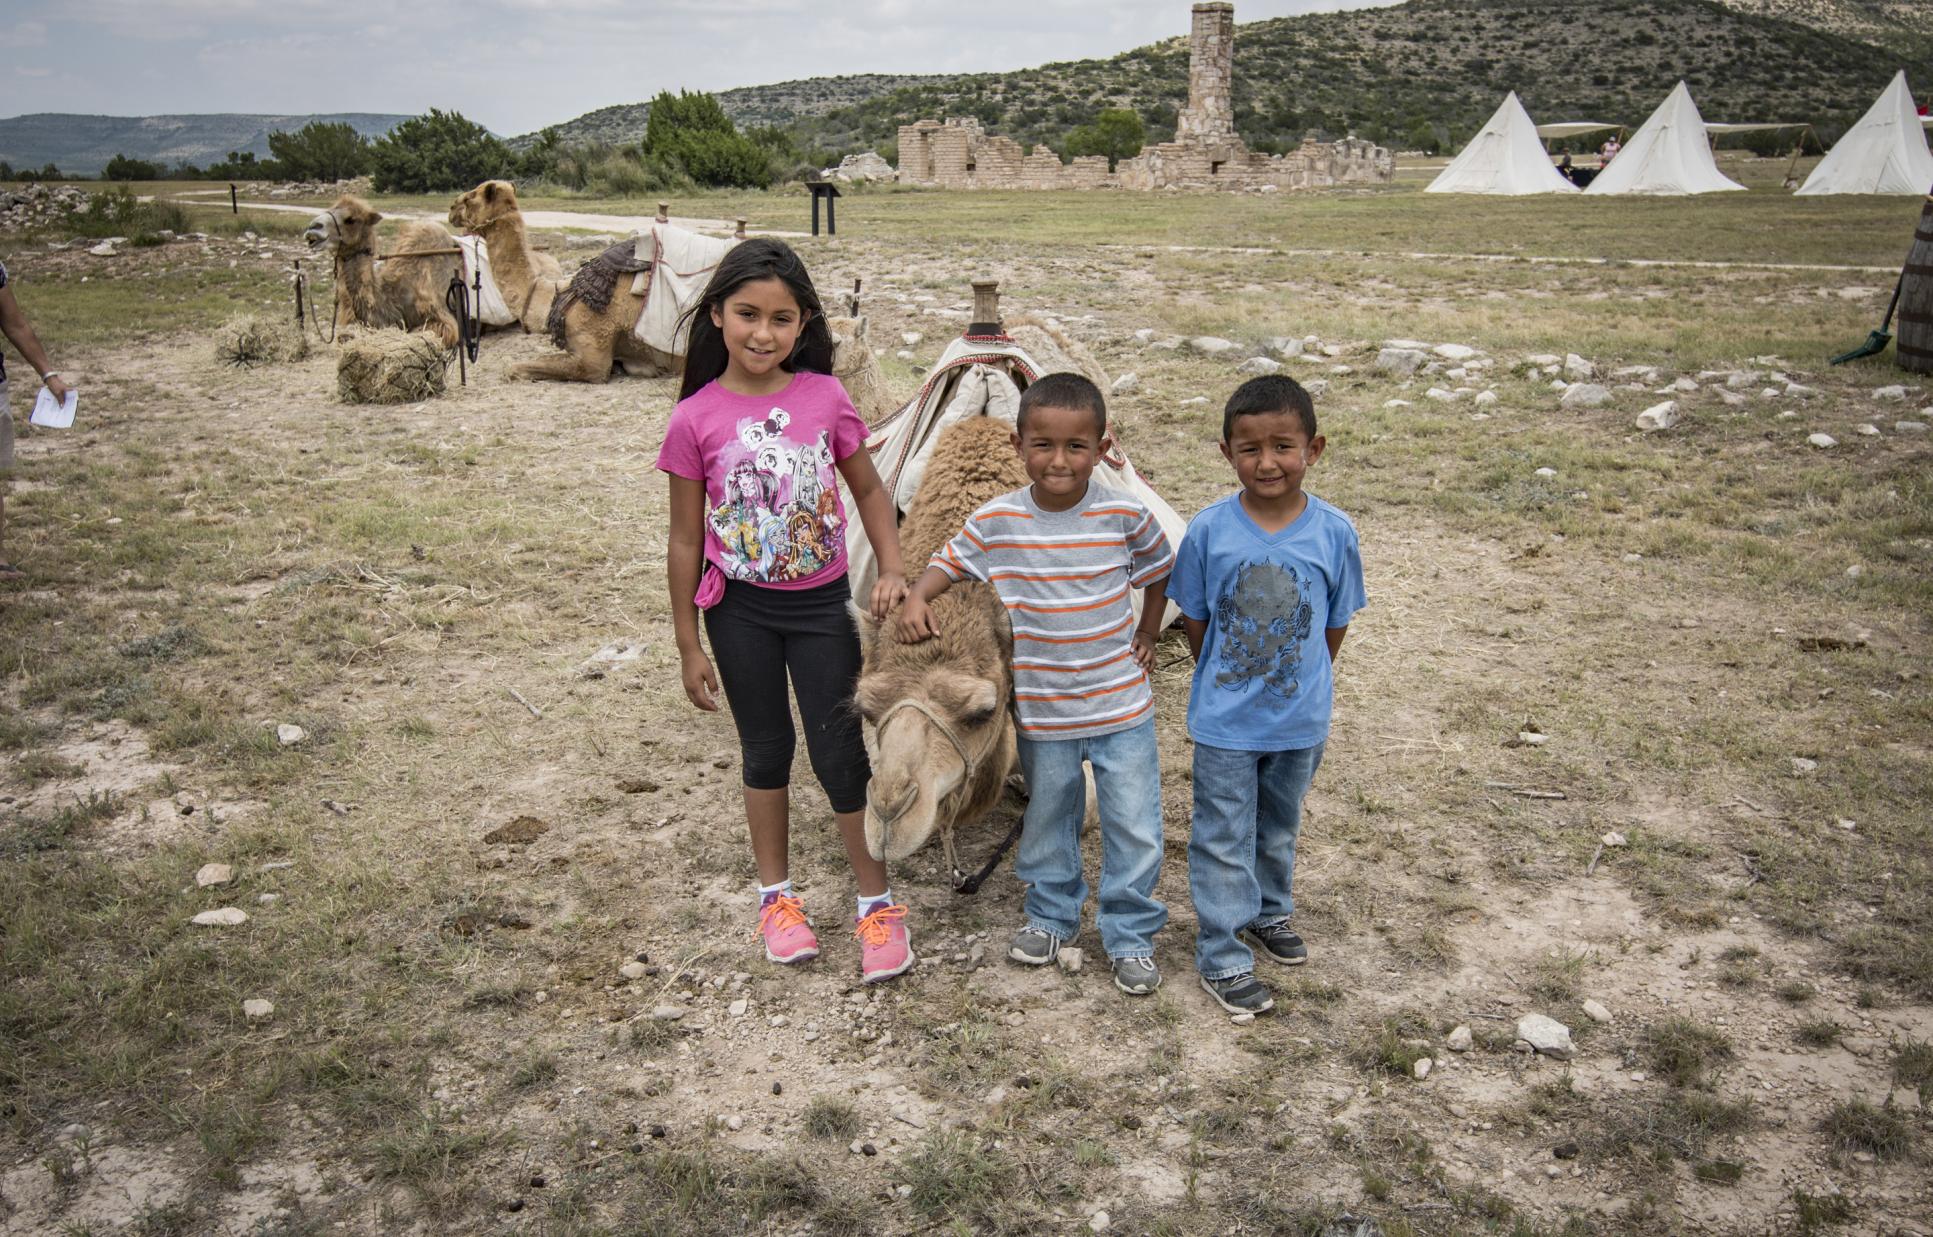 Children with a camel laying down